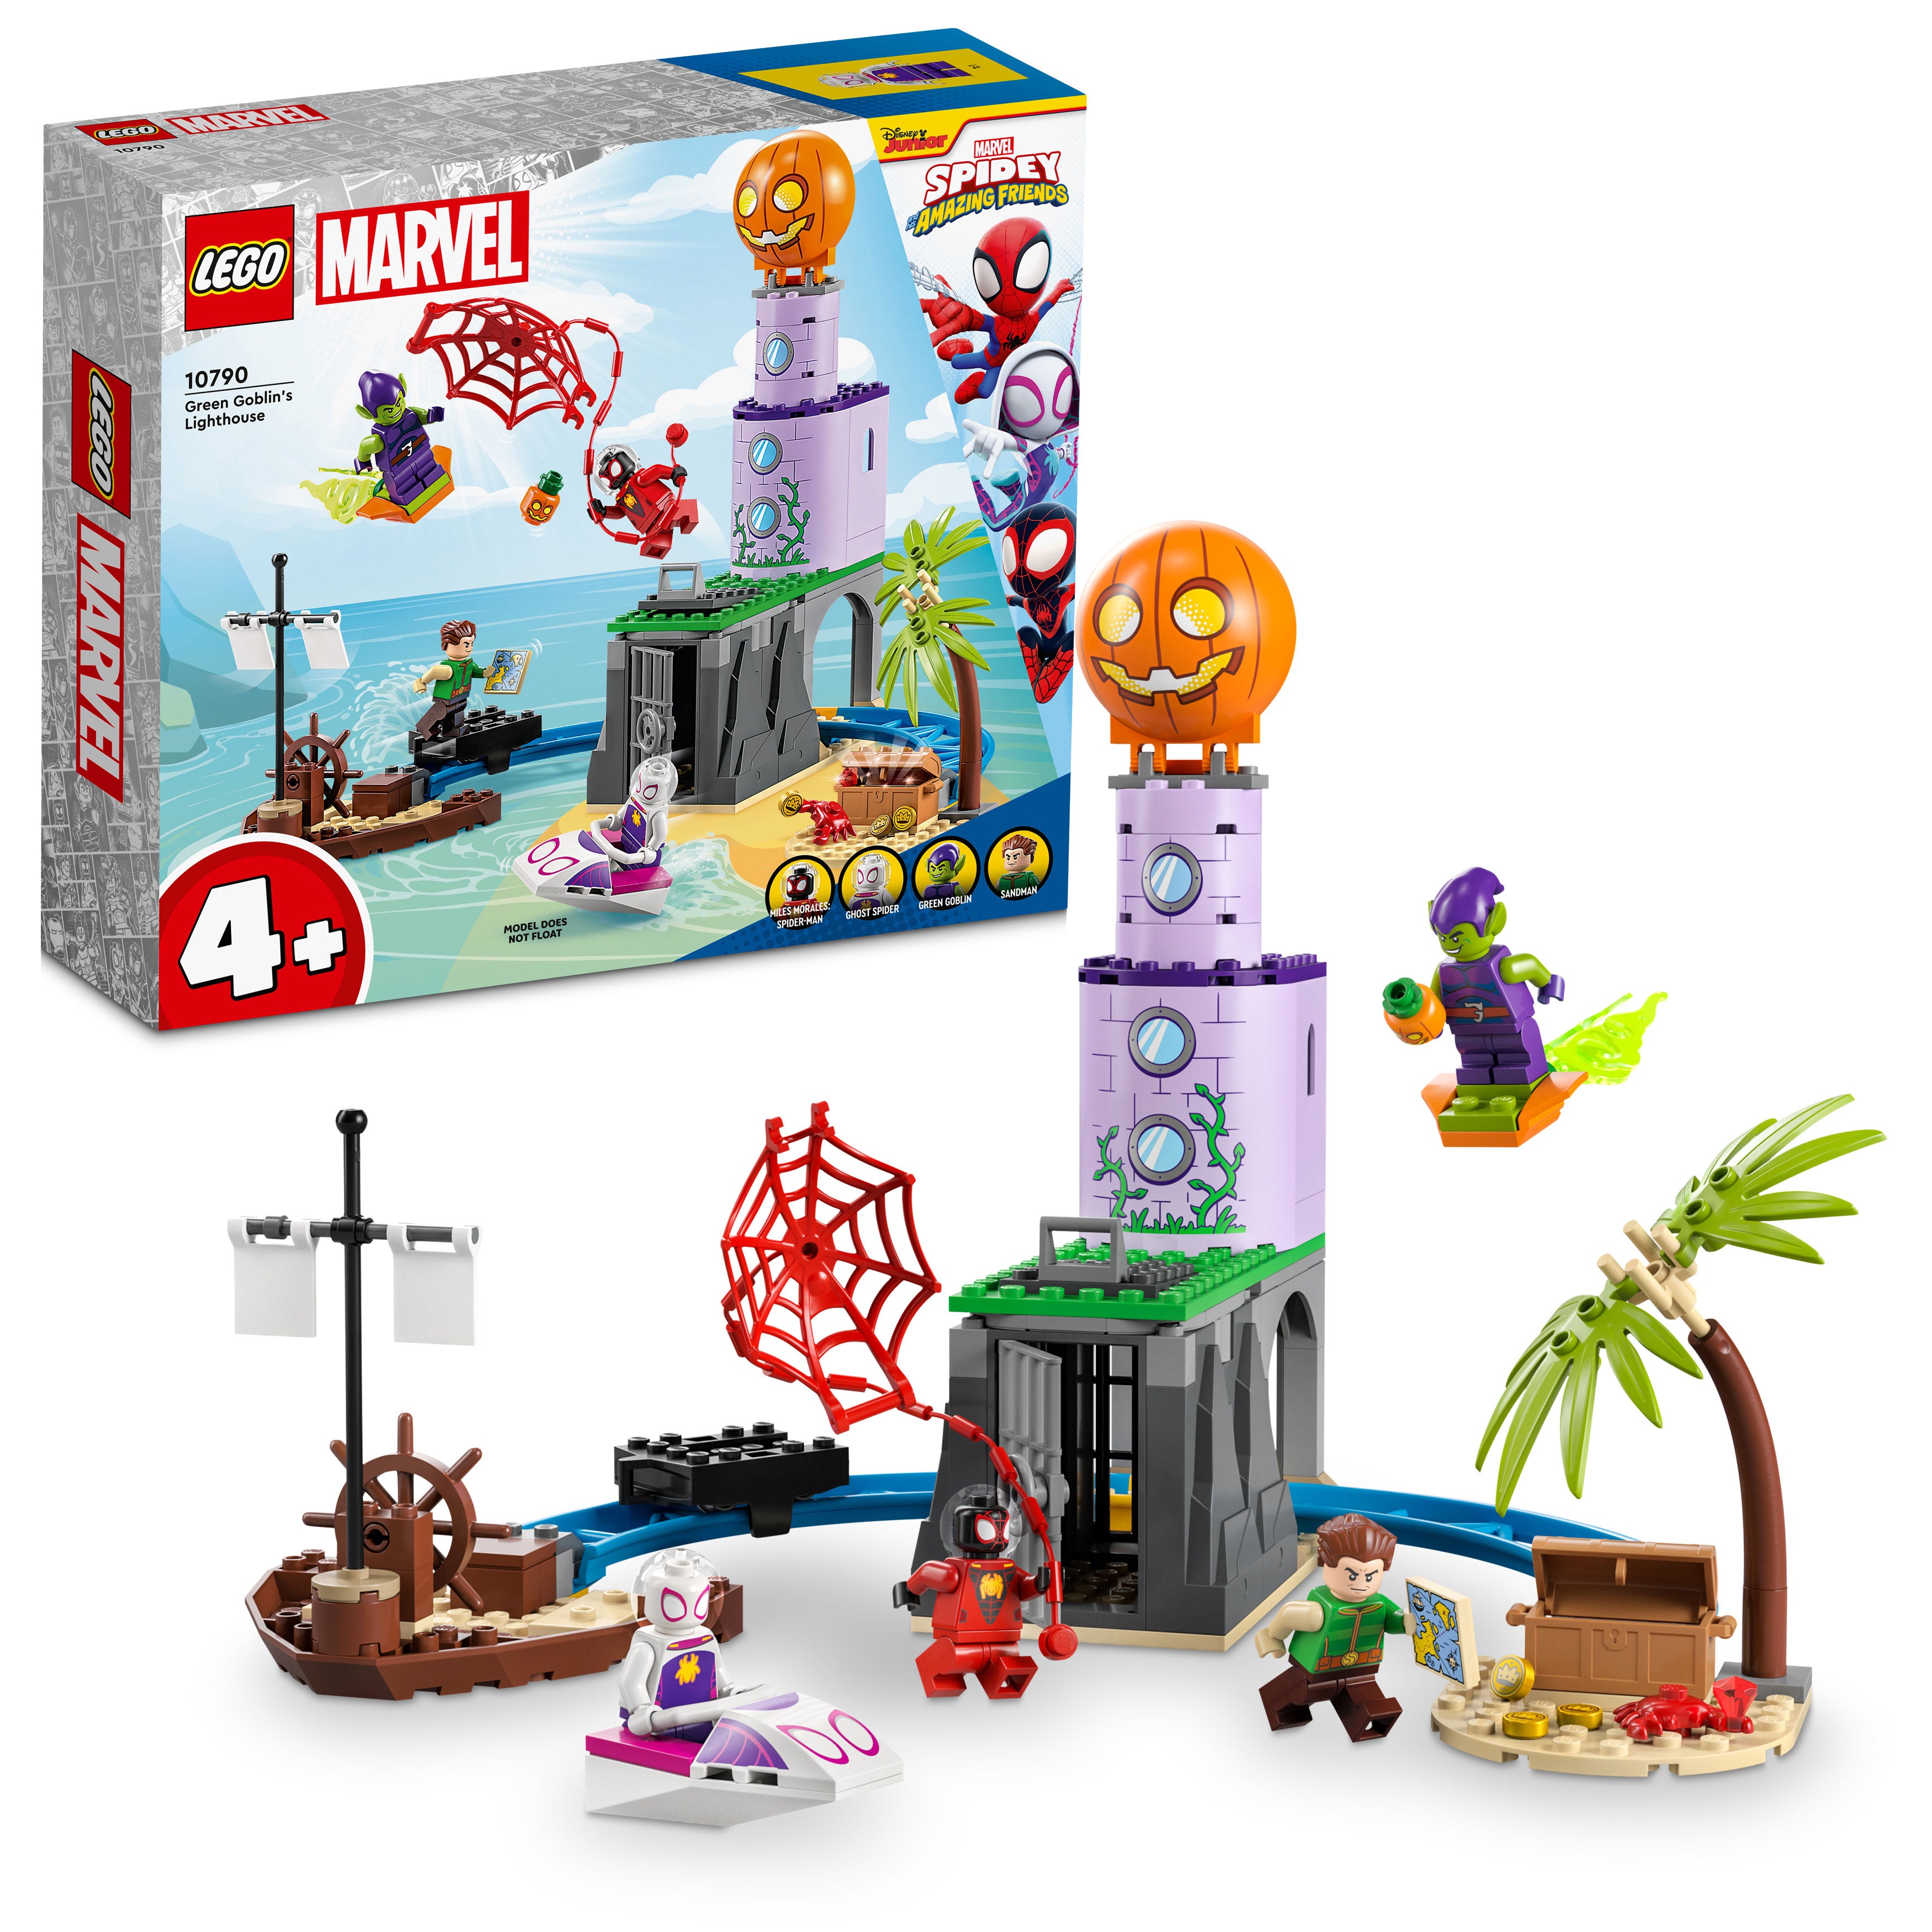 Lego 10790 Team Spidey at Green Goblins Lighthouse